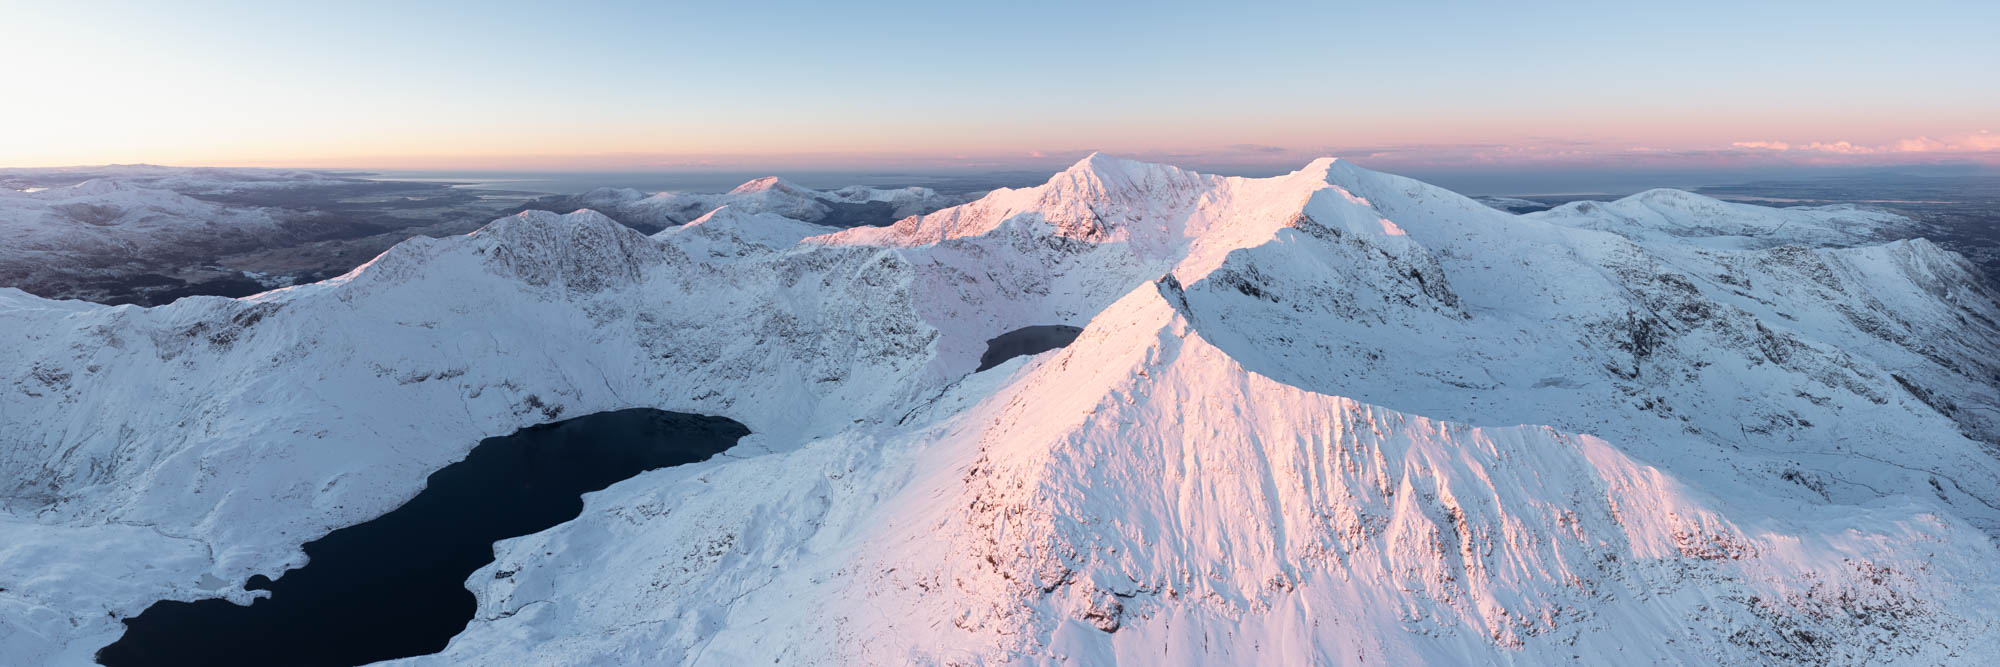 Aerial panorama of Crib Goch and Mount Snowdon covered in snow at sunrise